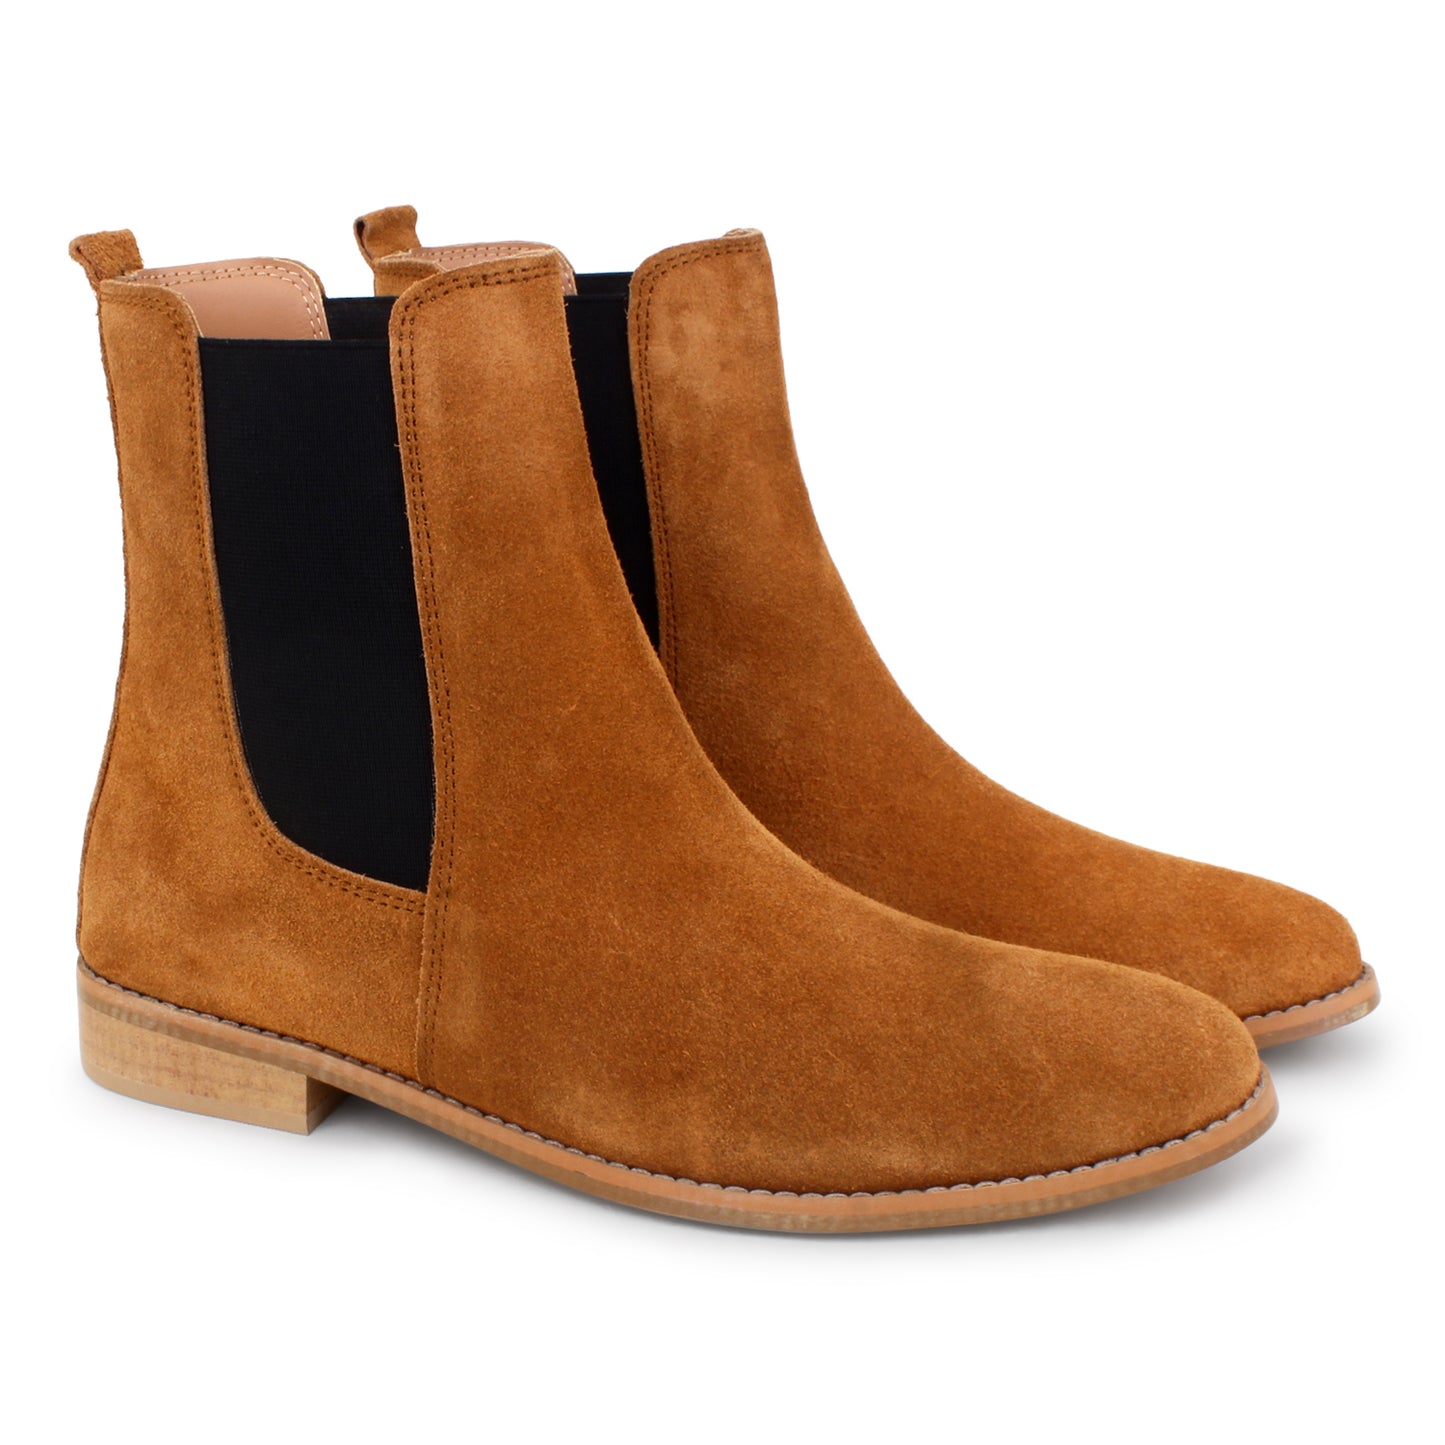 Italian Suede Leather Boots - Tan